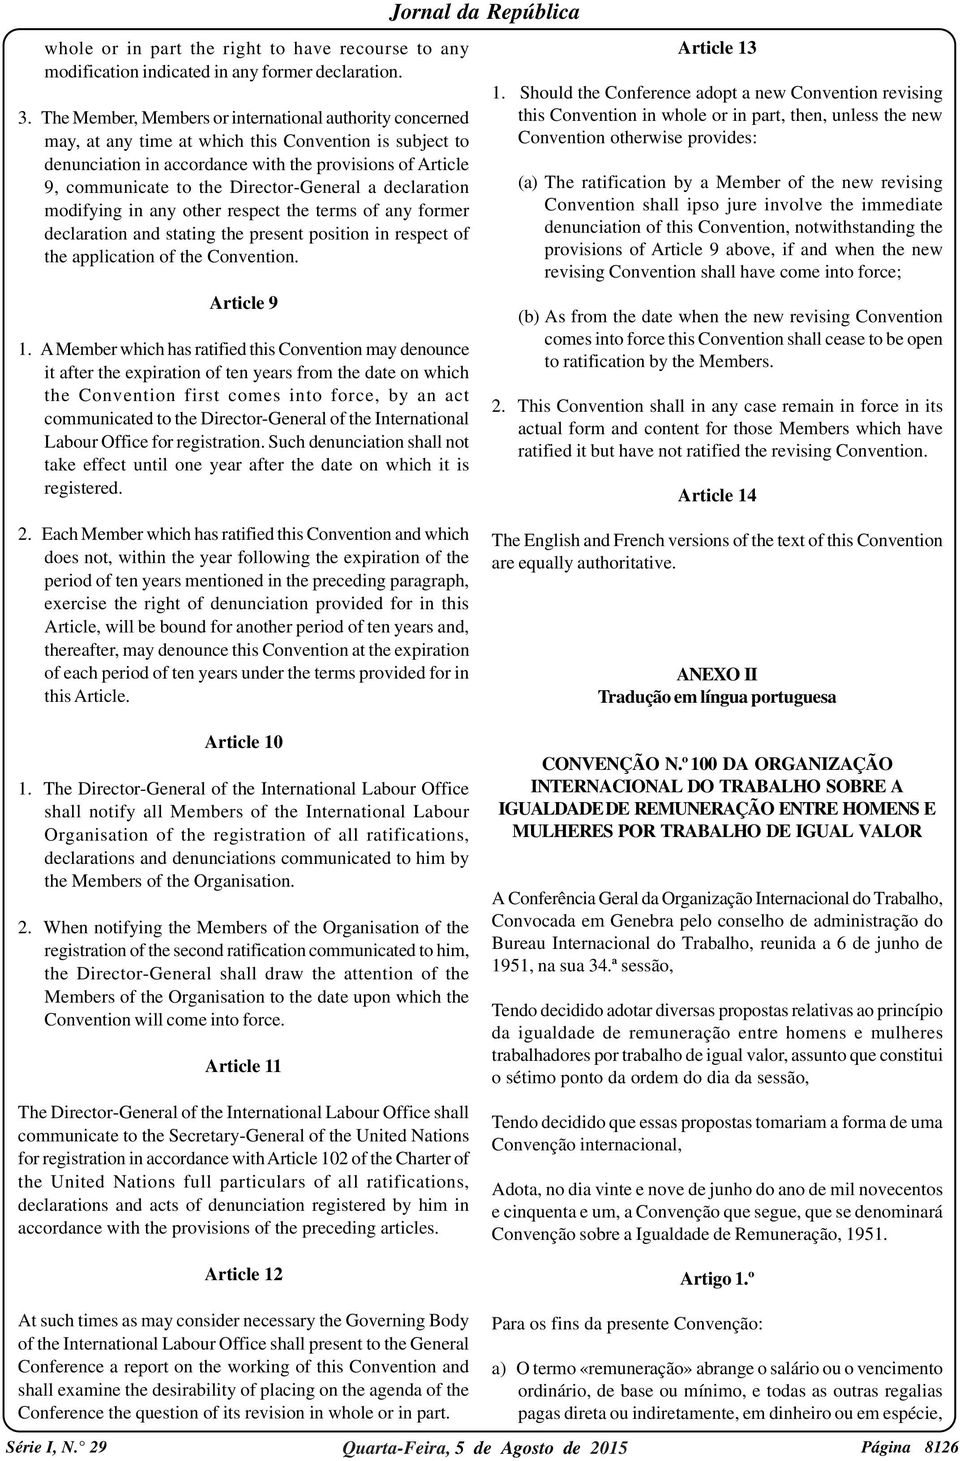 Director-General a declaration modifying in any other respect the terms of any former declaration and stating the present position in respect of the application of the Convention. Article 9 1.